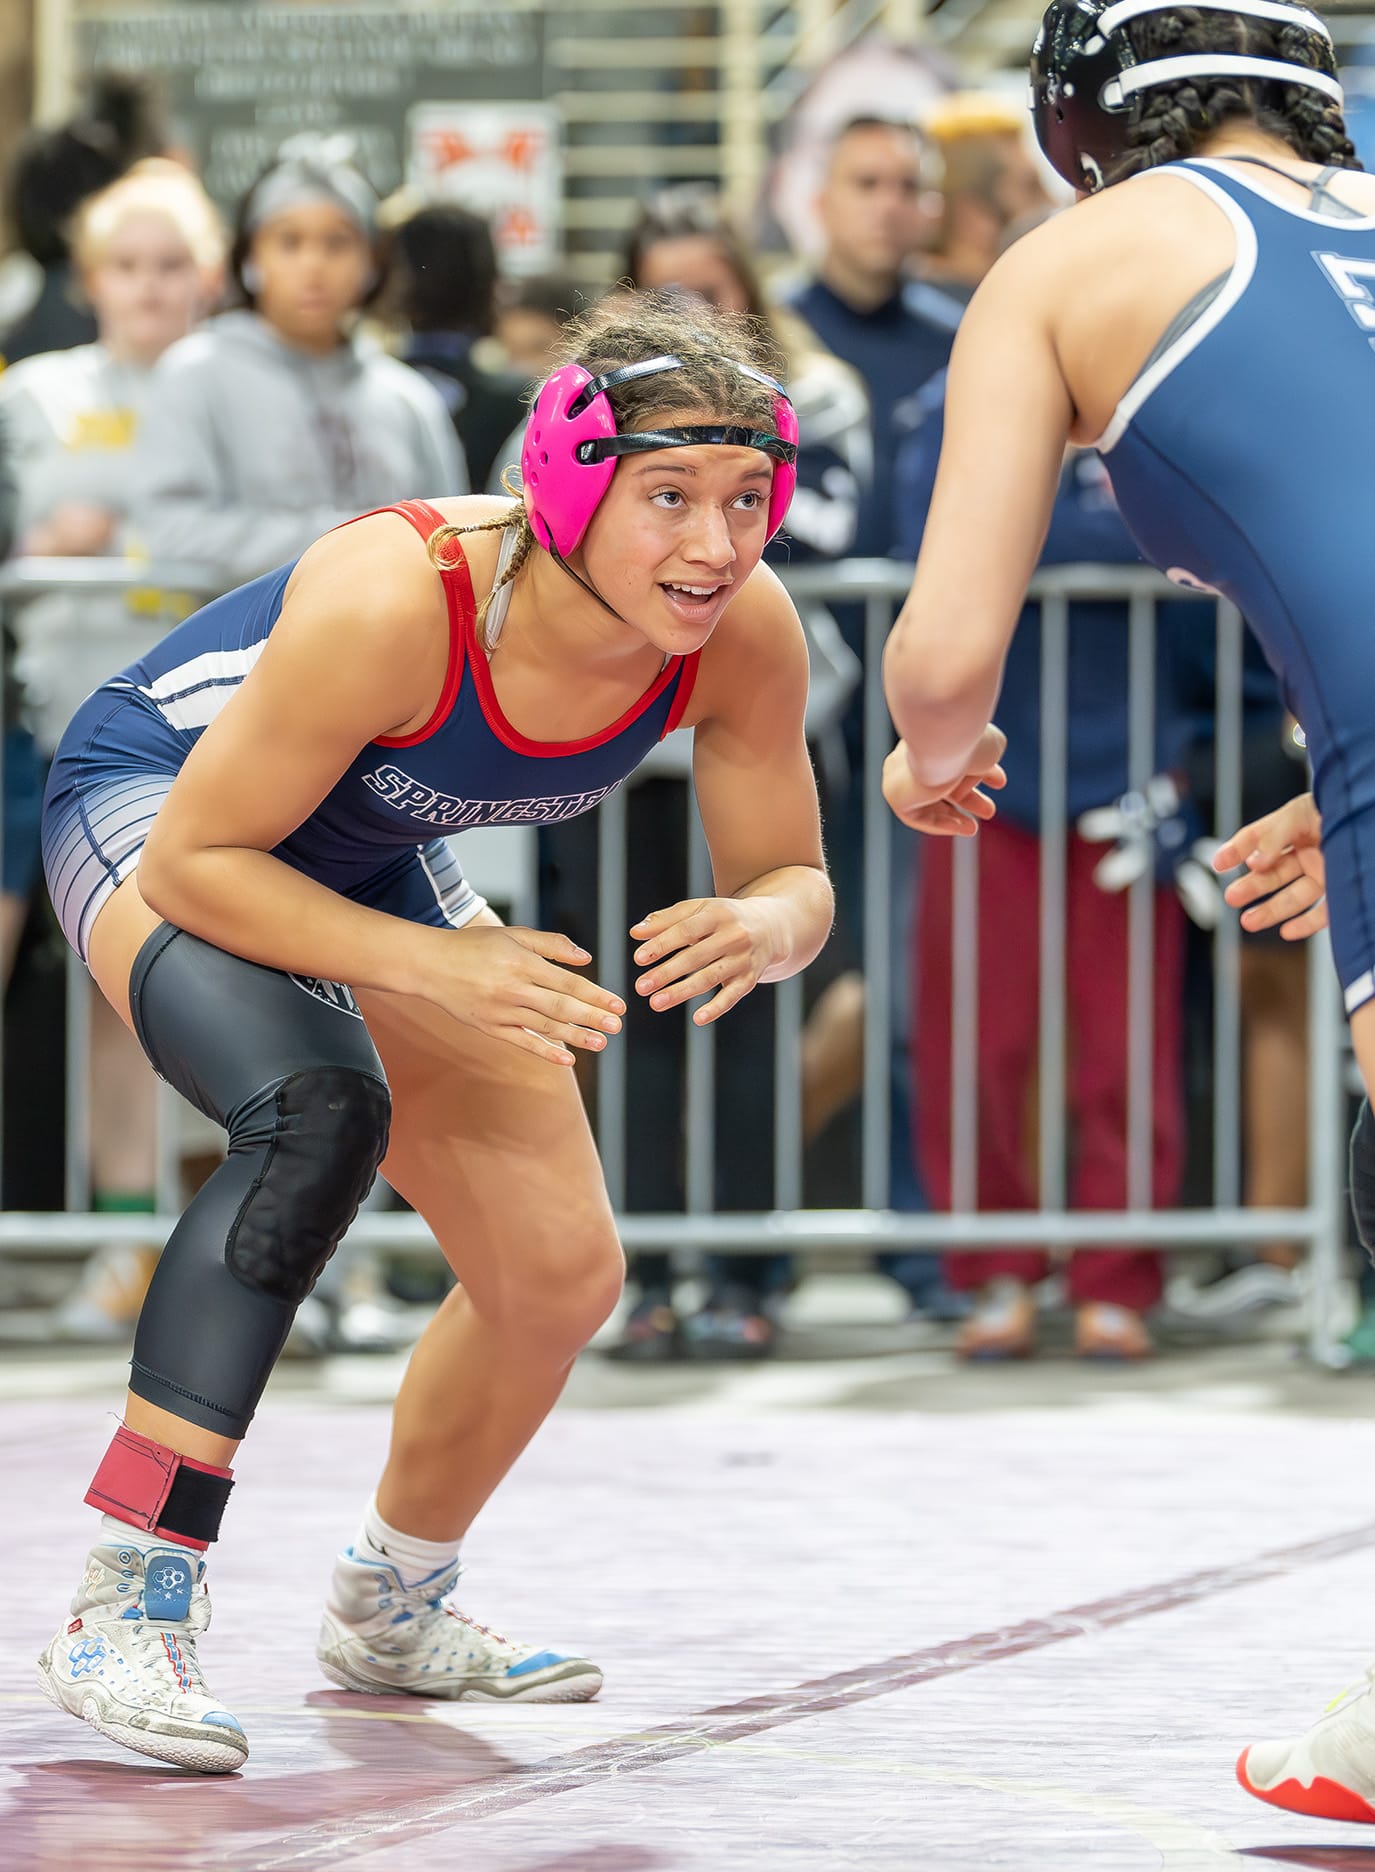 Springstead High 120 pound Jasmine Serrano took her match against Arianna Ruiz from Mater Lakes 6-1to advance in the consolation bracket at the 2024 FHSAA State Championship in Kissimmee. [Photo by Joe DiCristofalo]